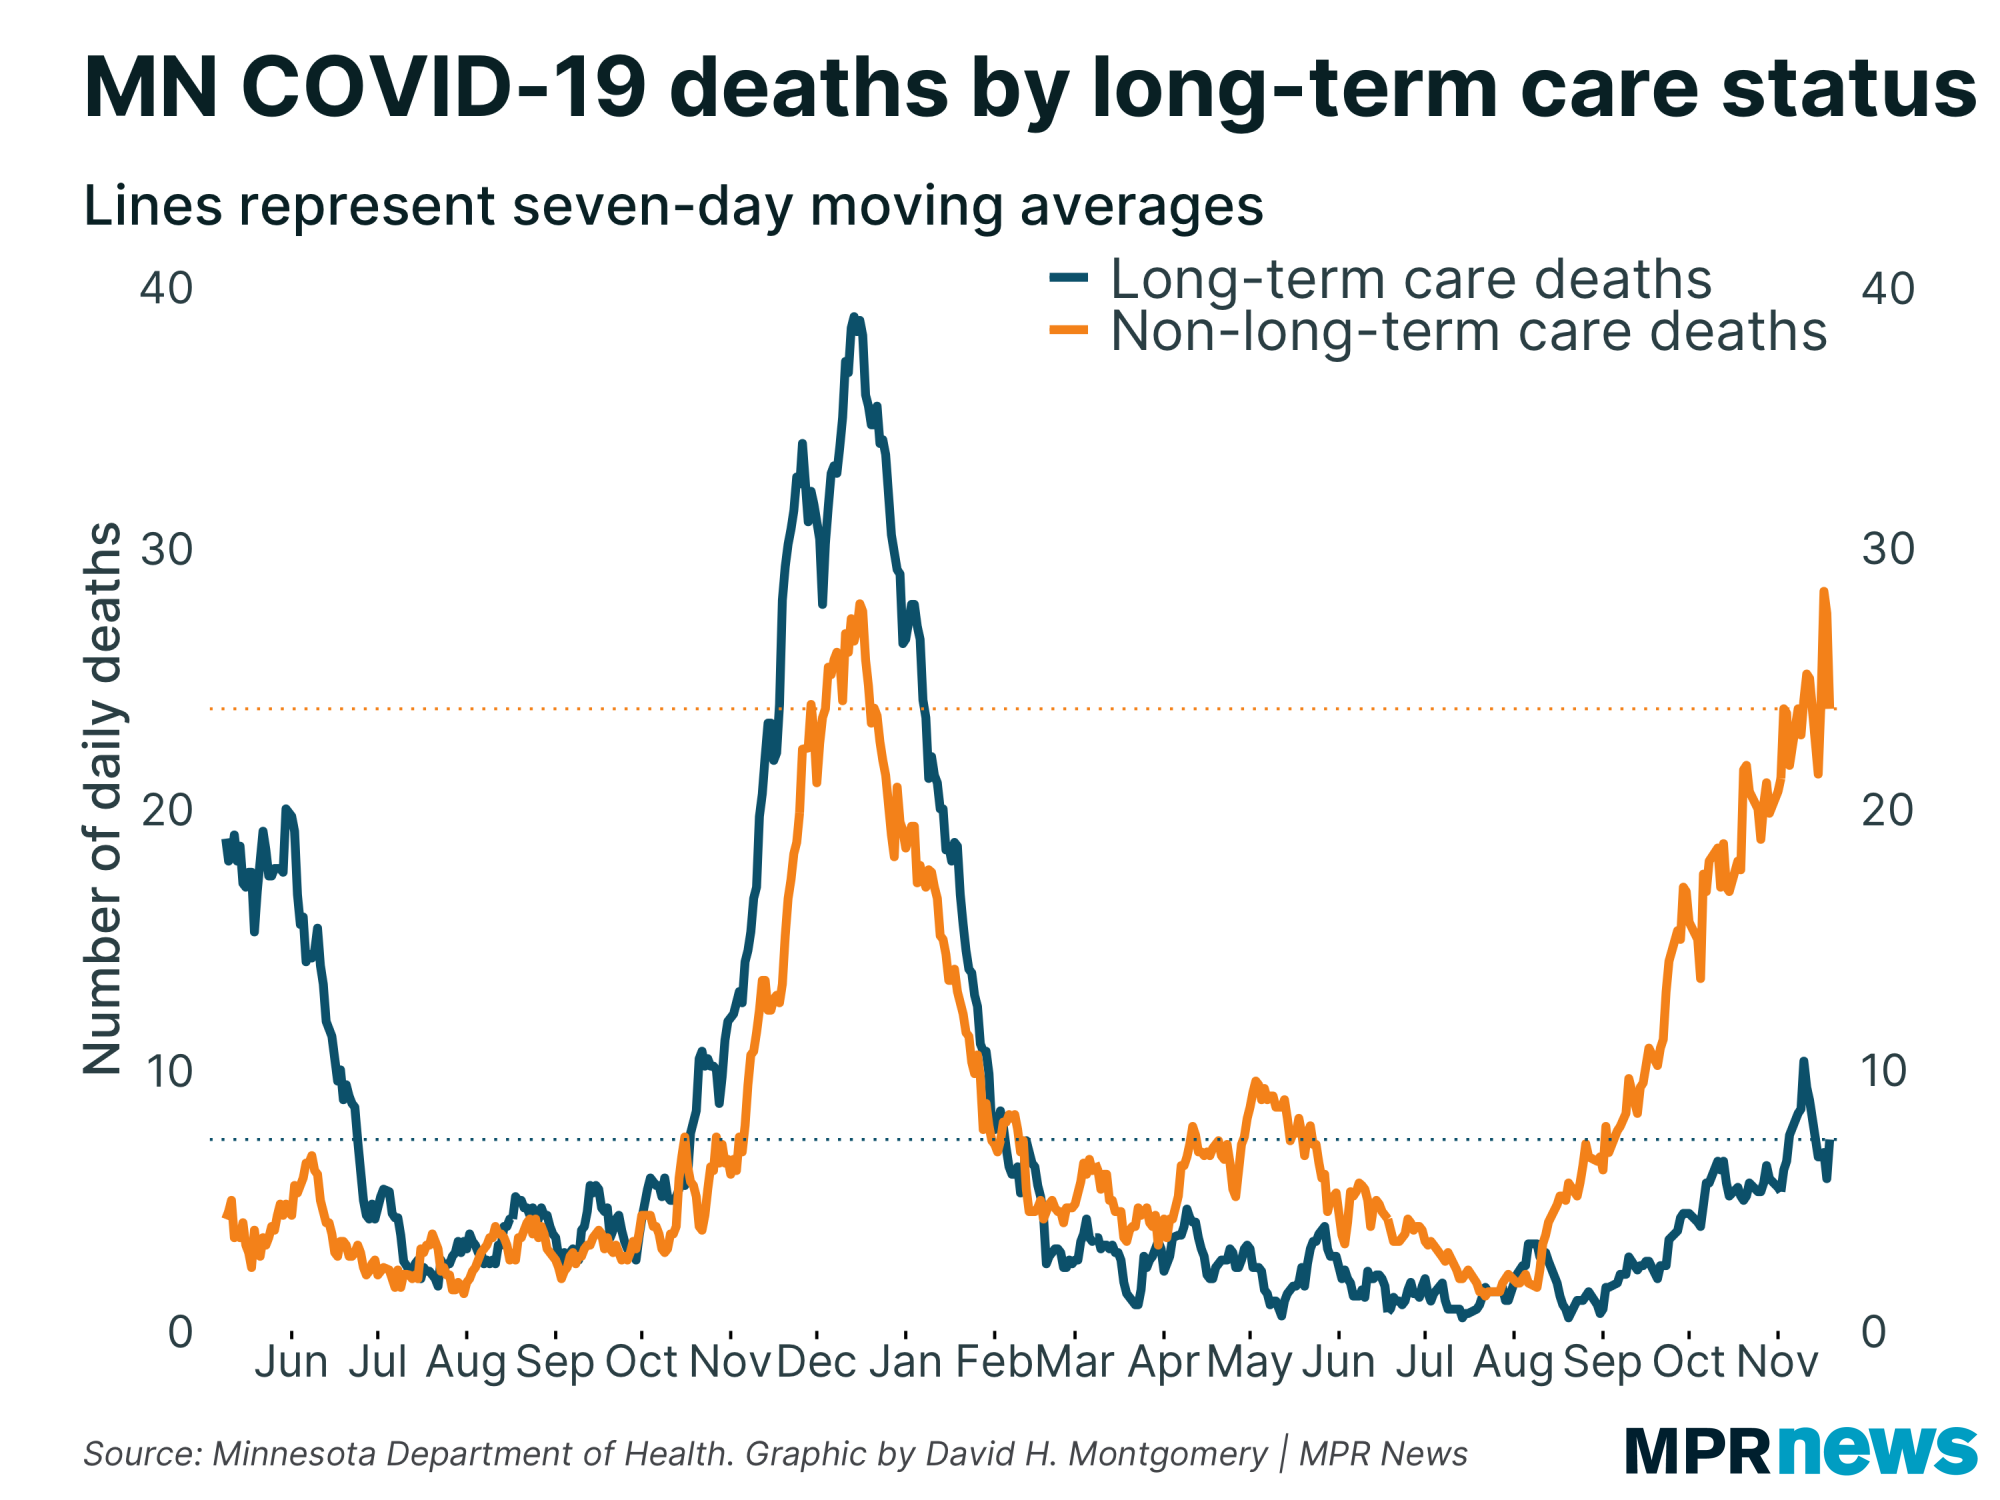 Graph of COVID-19 deaths by long-term-care status